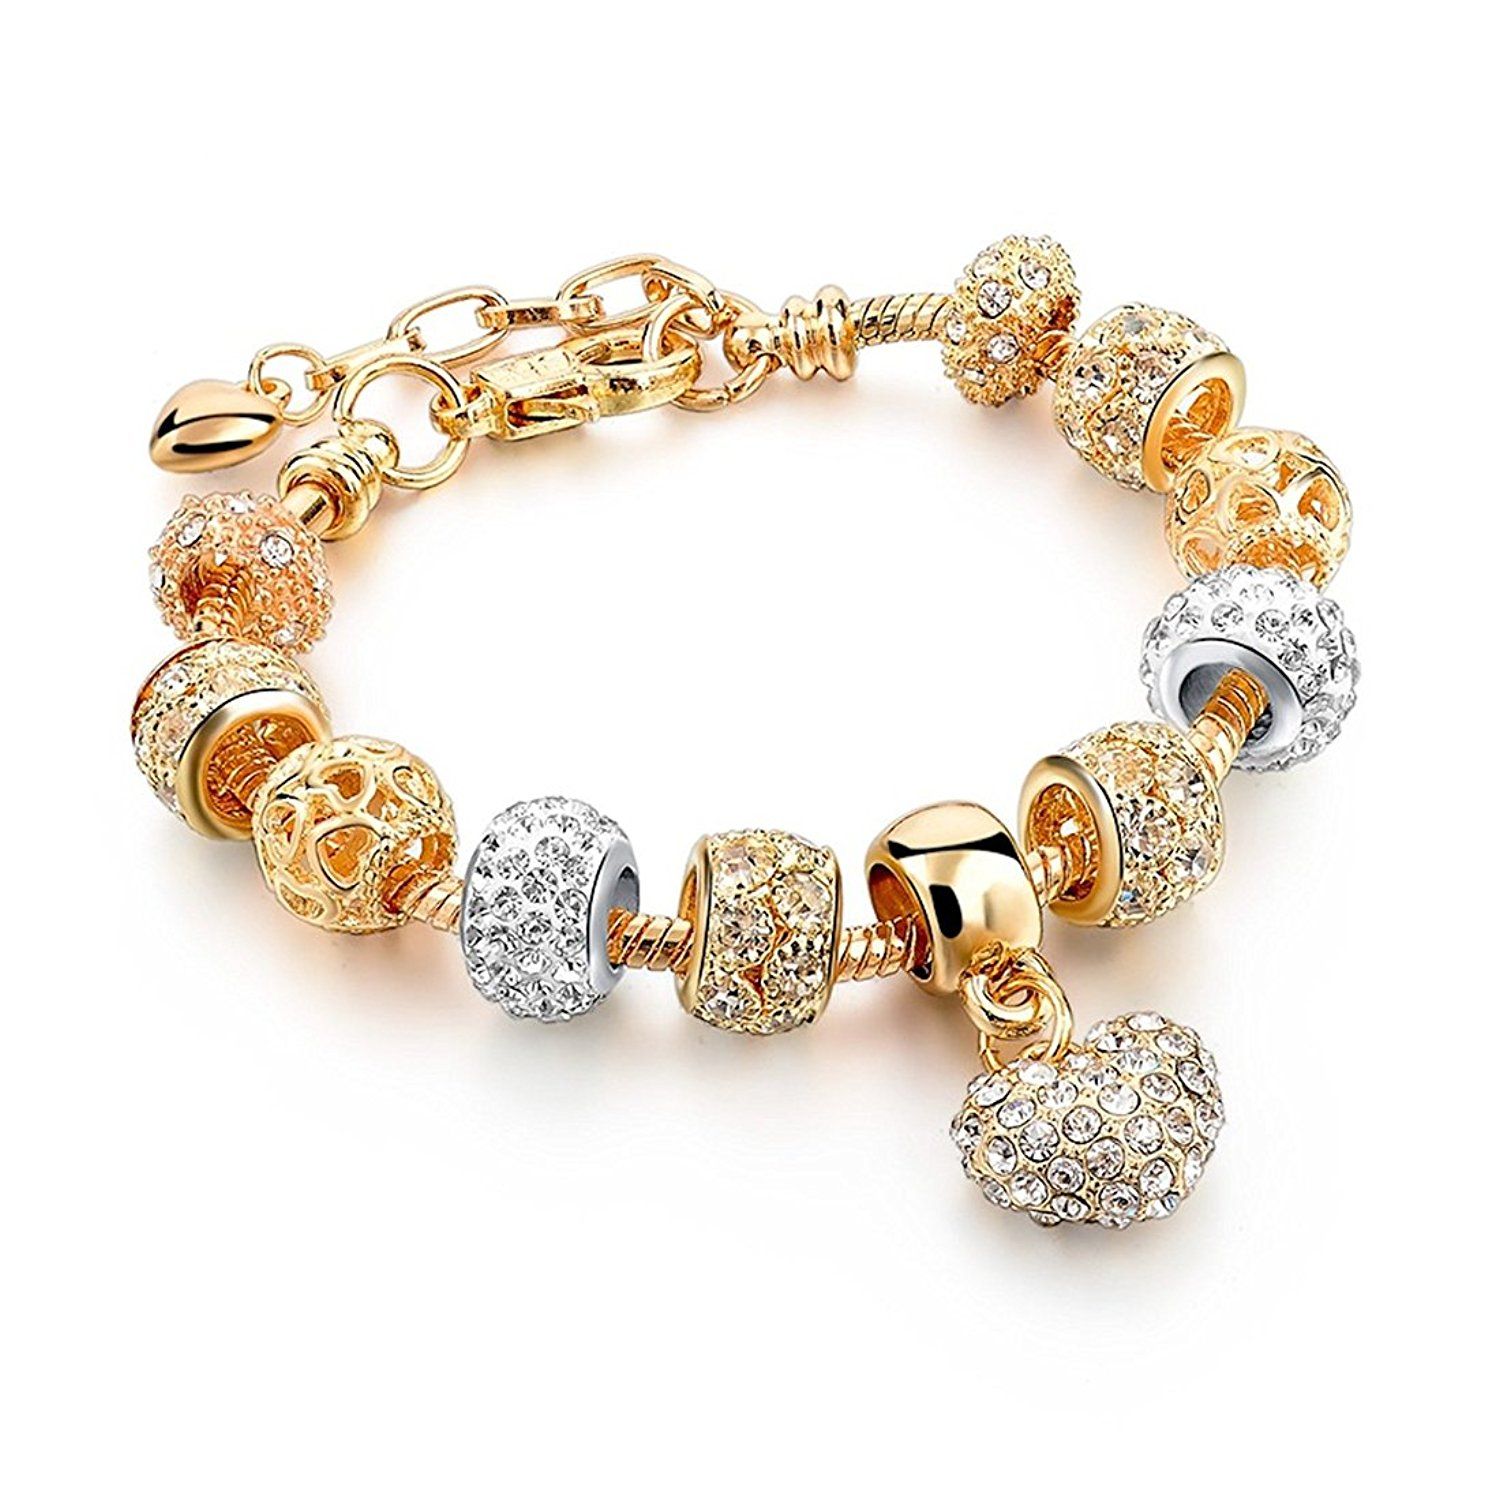 18CT GOLD CHARM BRACELET WITH 9CT GOLD AND 18CT GOLD CHARMS